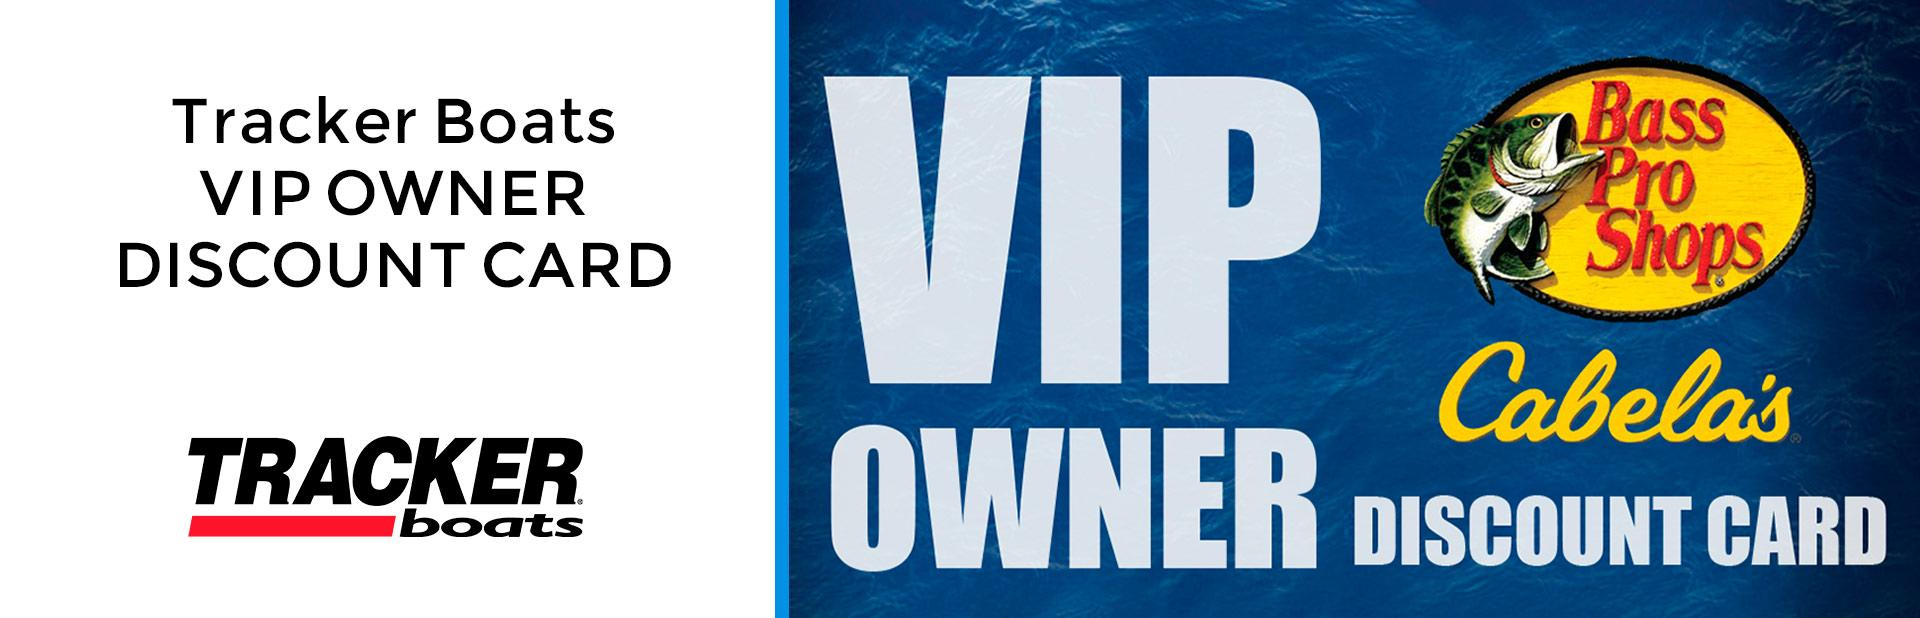 Vip Owner Discount Card Tracker Boats